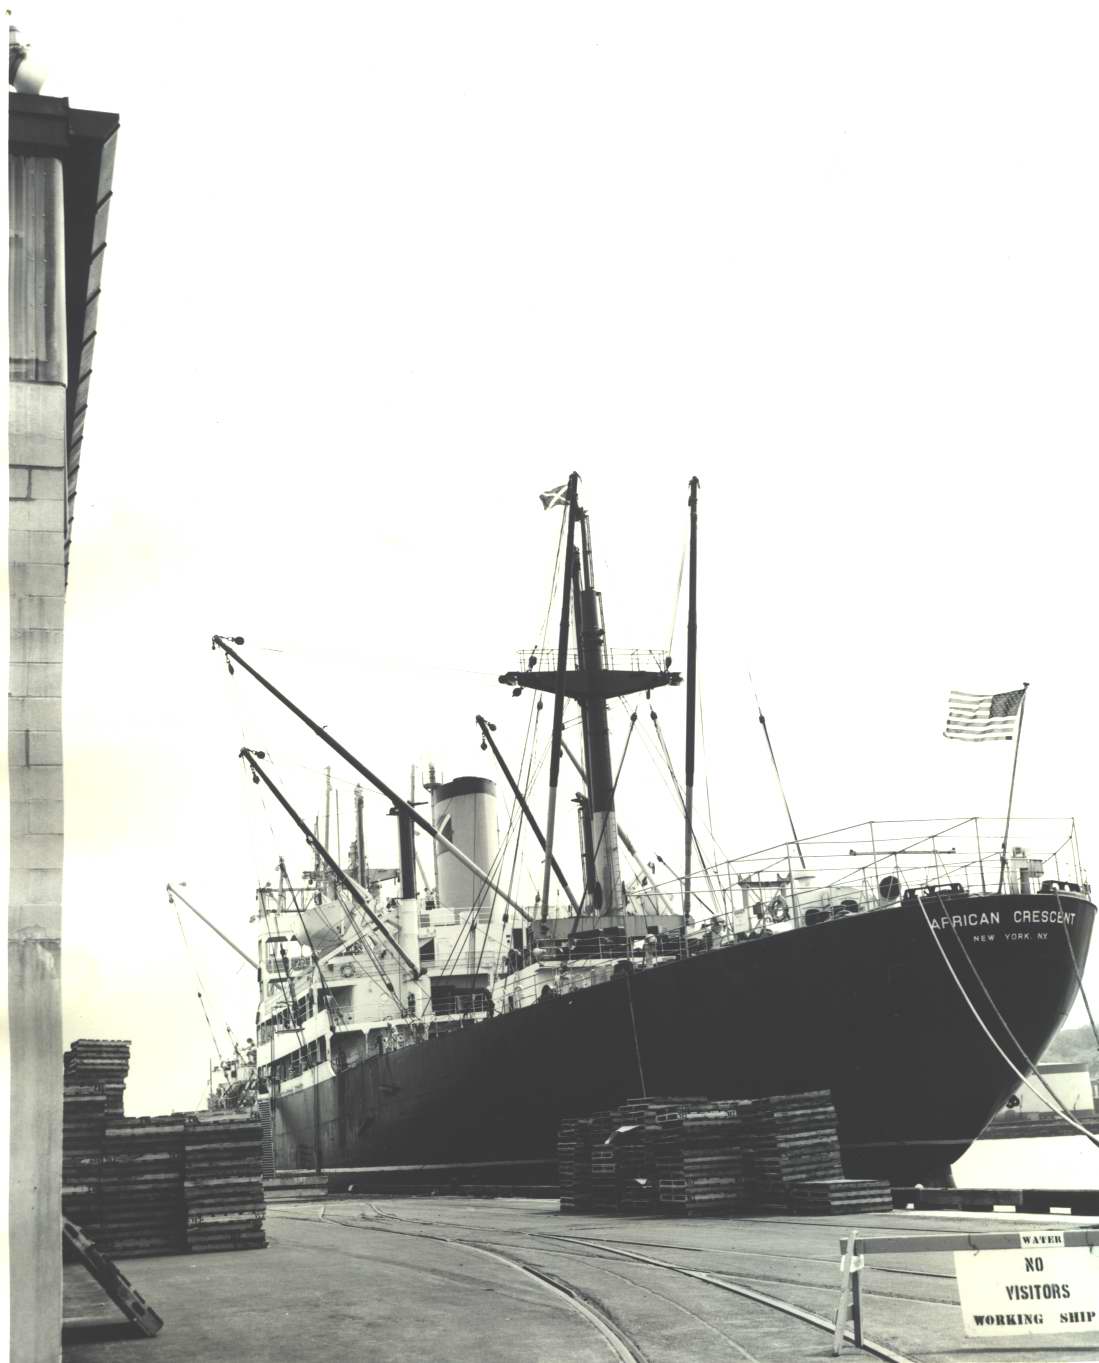 'African Crescent' moored at P